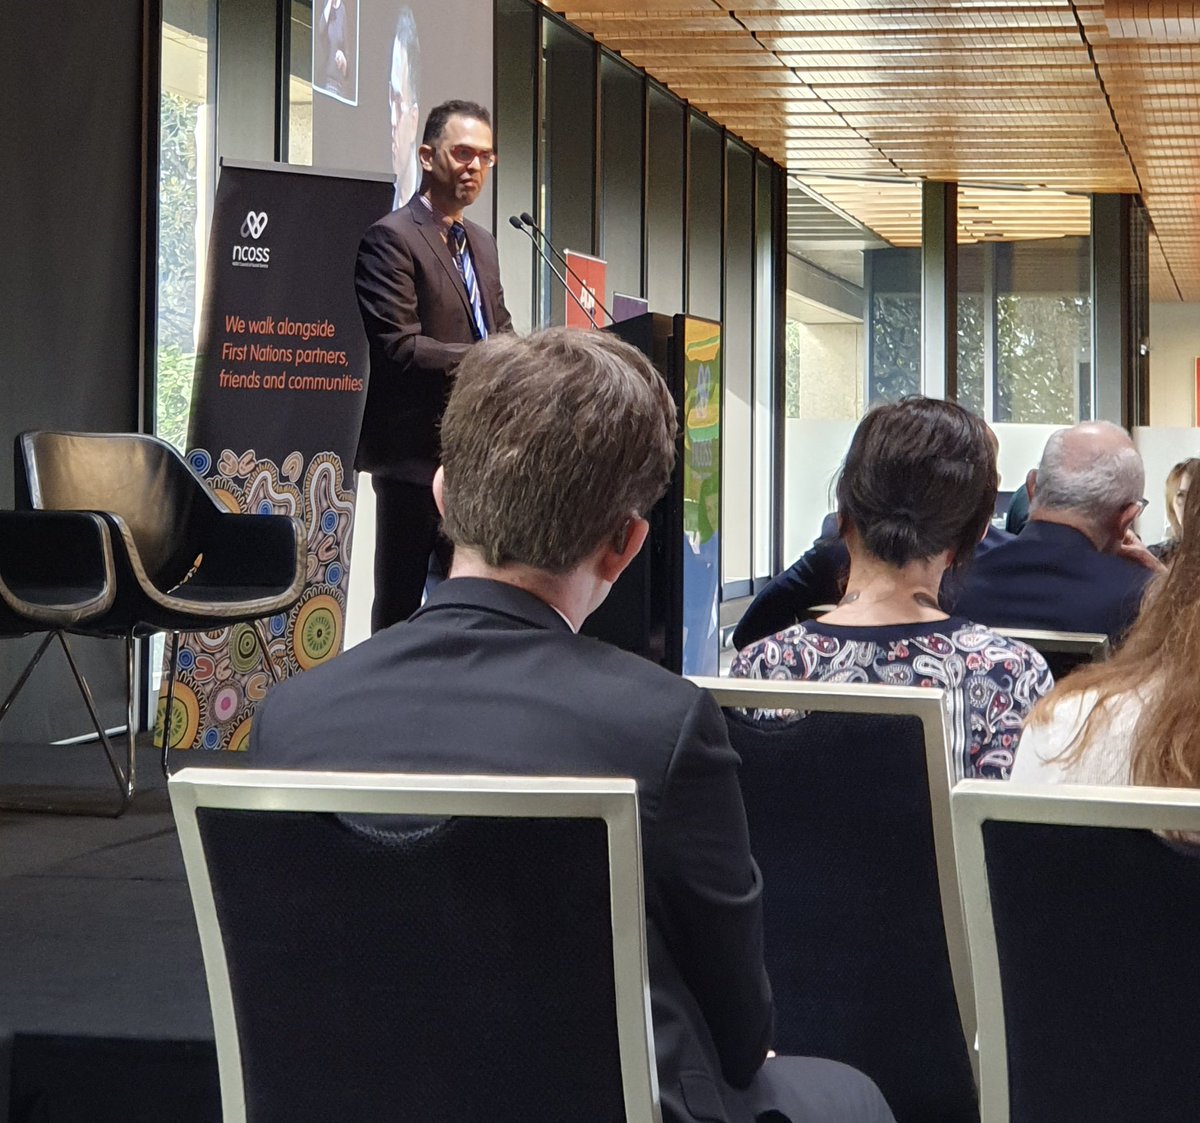 We’re at the @_NCOSS_ Post-Budget breakfast this morning, with NSW Treasurer @dmookheyMLC giving an opening address on: - importance of supporting community service sector; - importance of building more housing & social housing; - increased funding for community service sector.